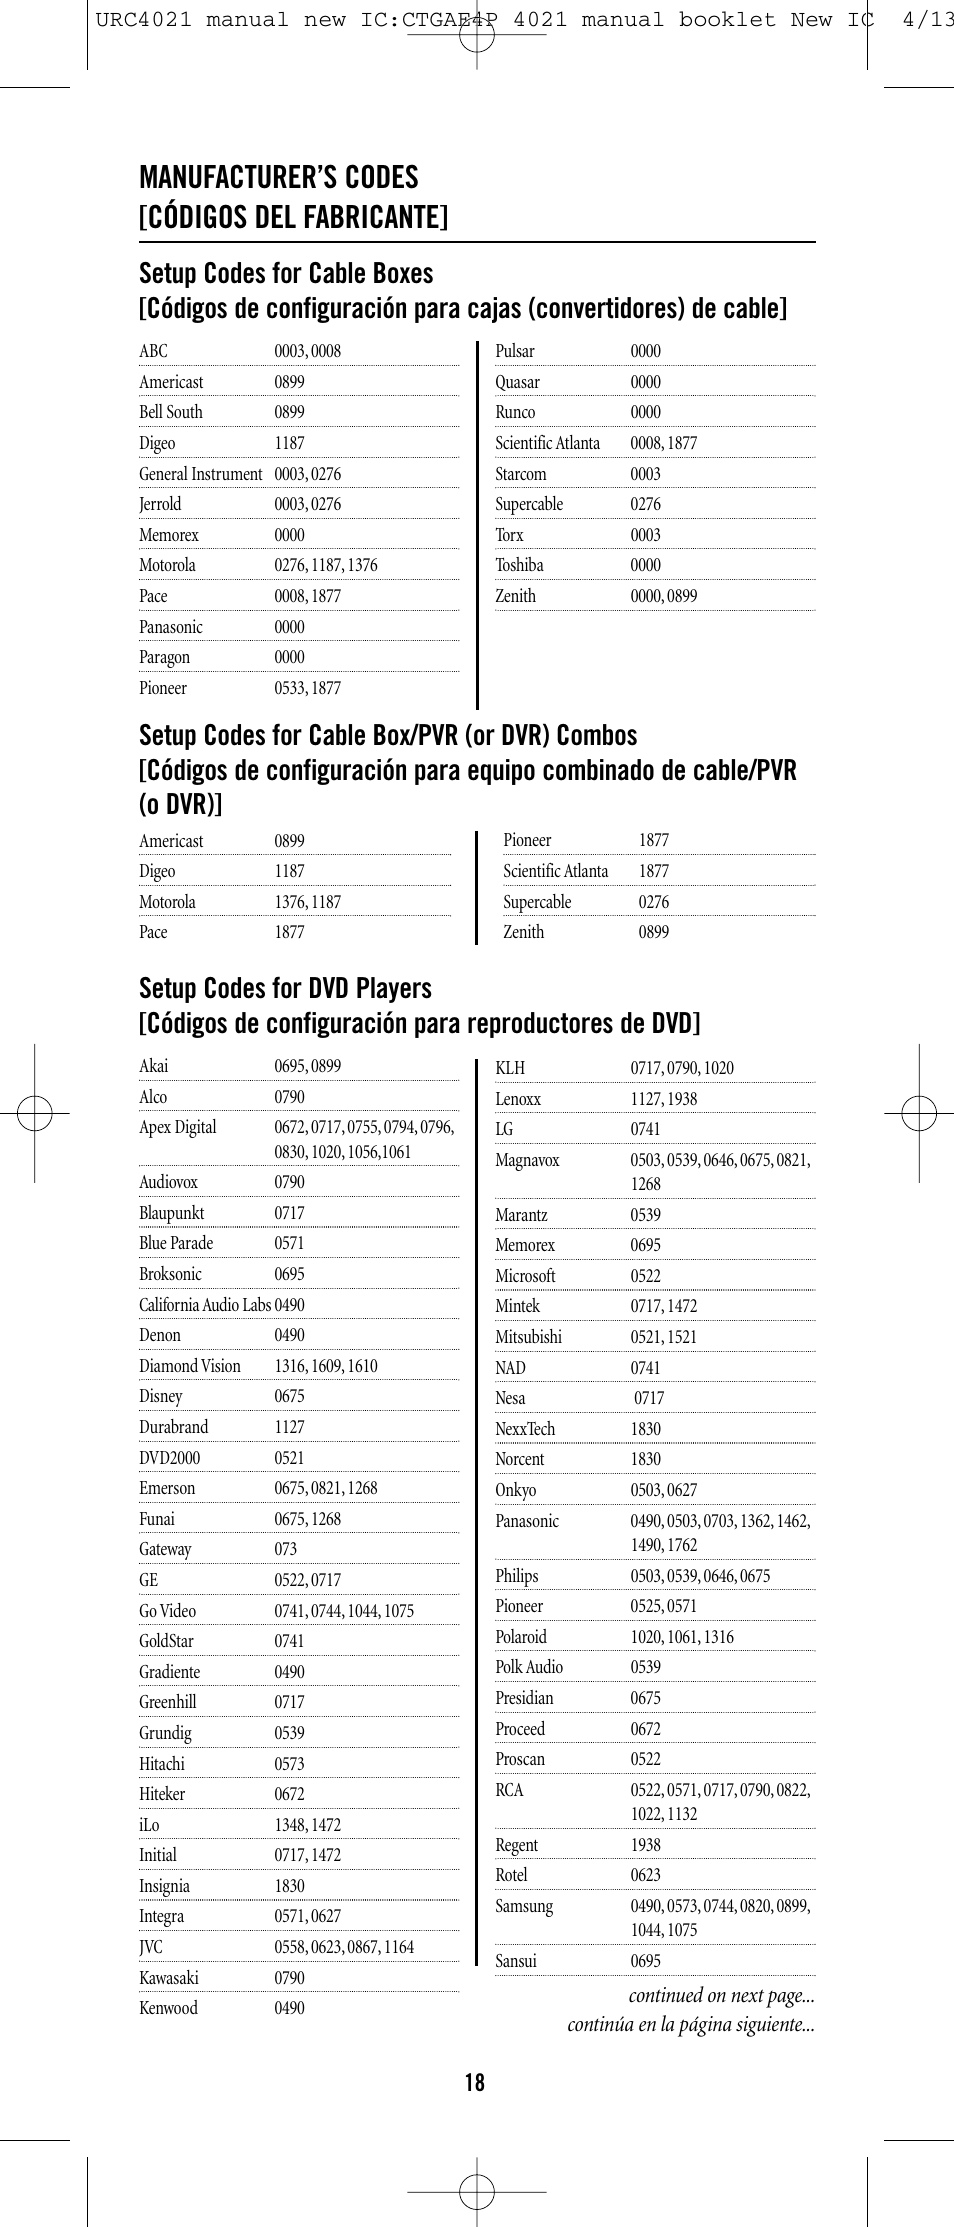 Manufacturer's codes [códigos del fabricante | Universal Remote Control  (URS) ONE FOR ALL URC 4021 User Manual | Page 18 / 23